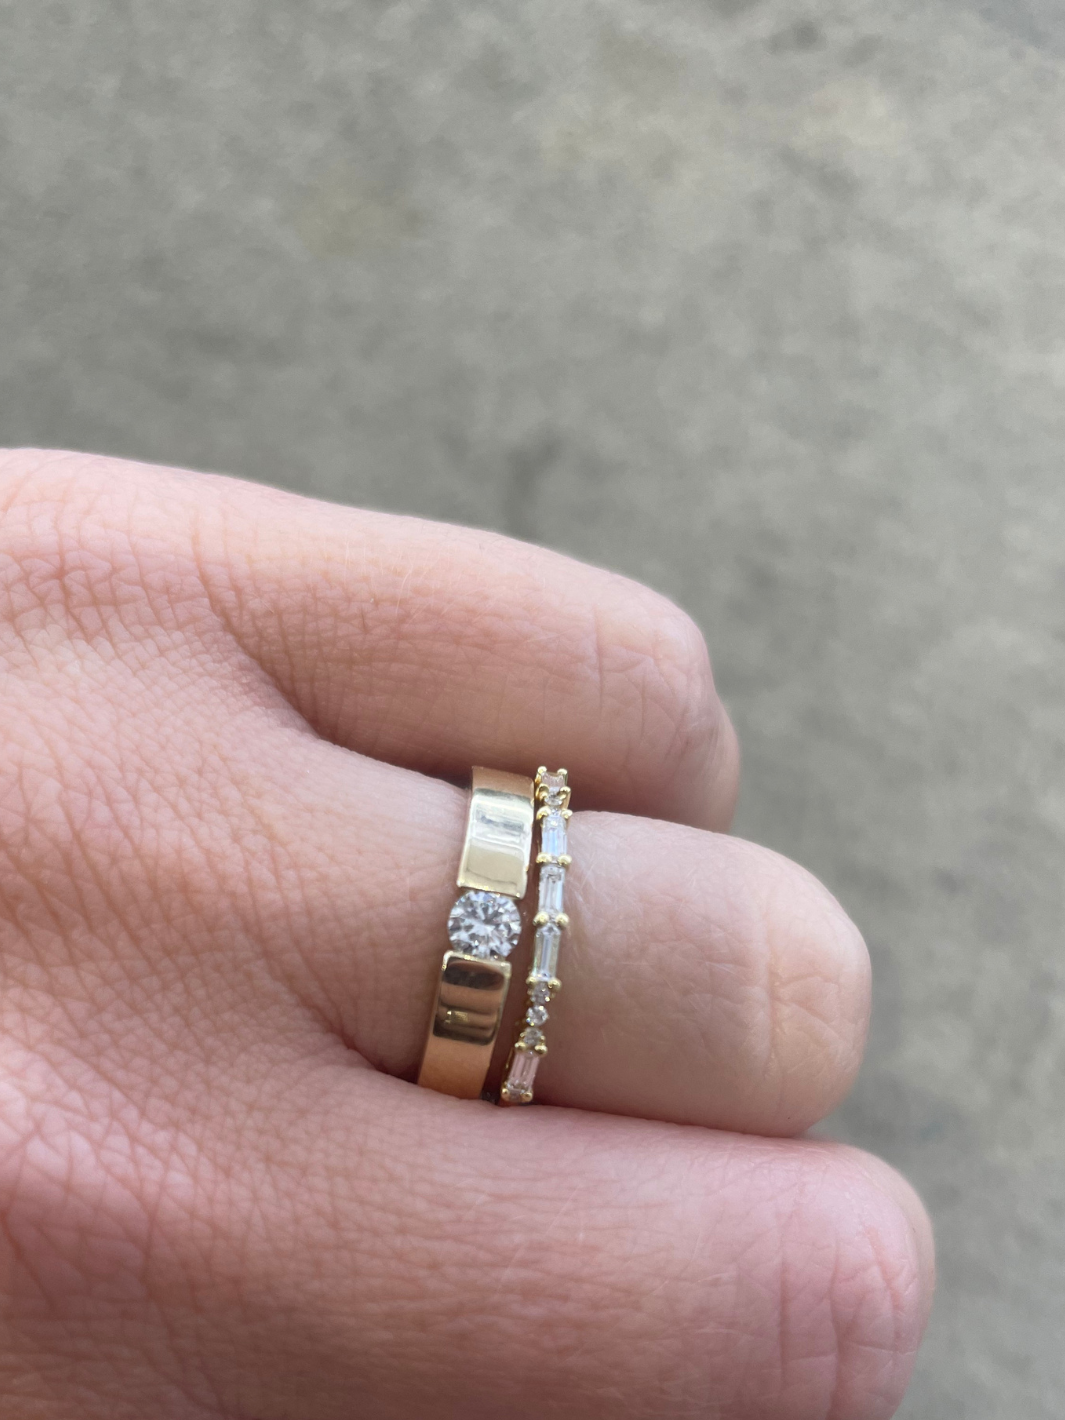 The Stevie Setting 18ct Yellow Gold Baguette & Round Diamond Band